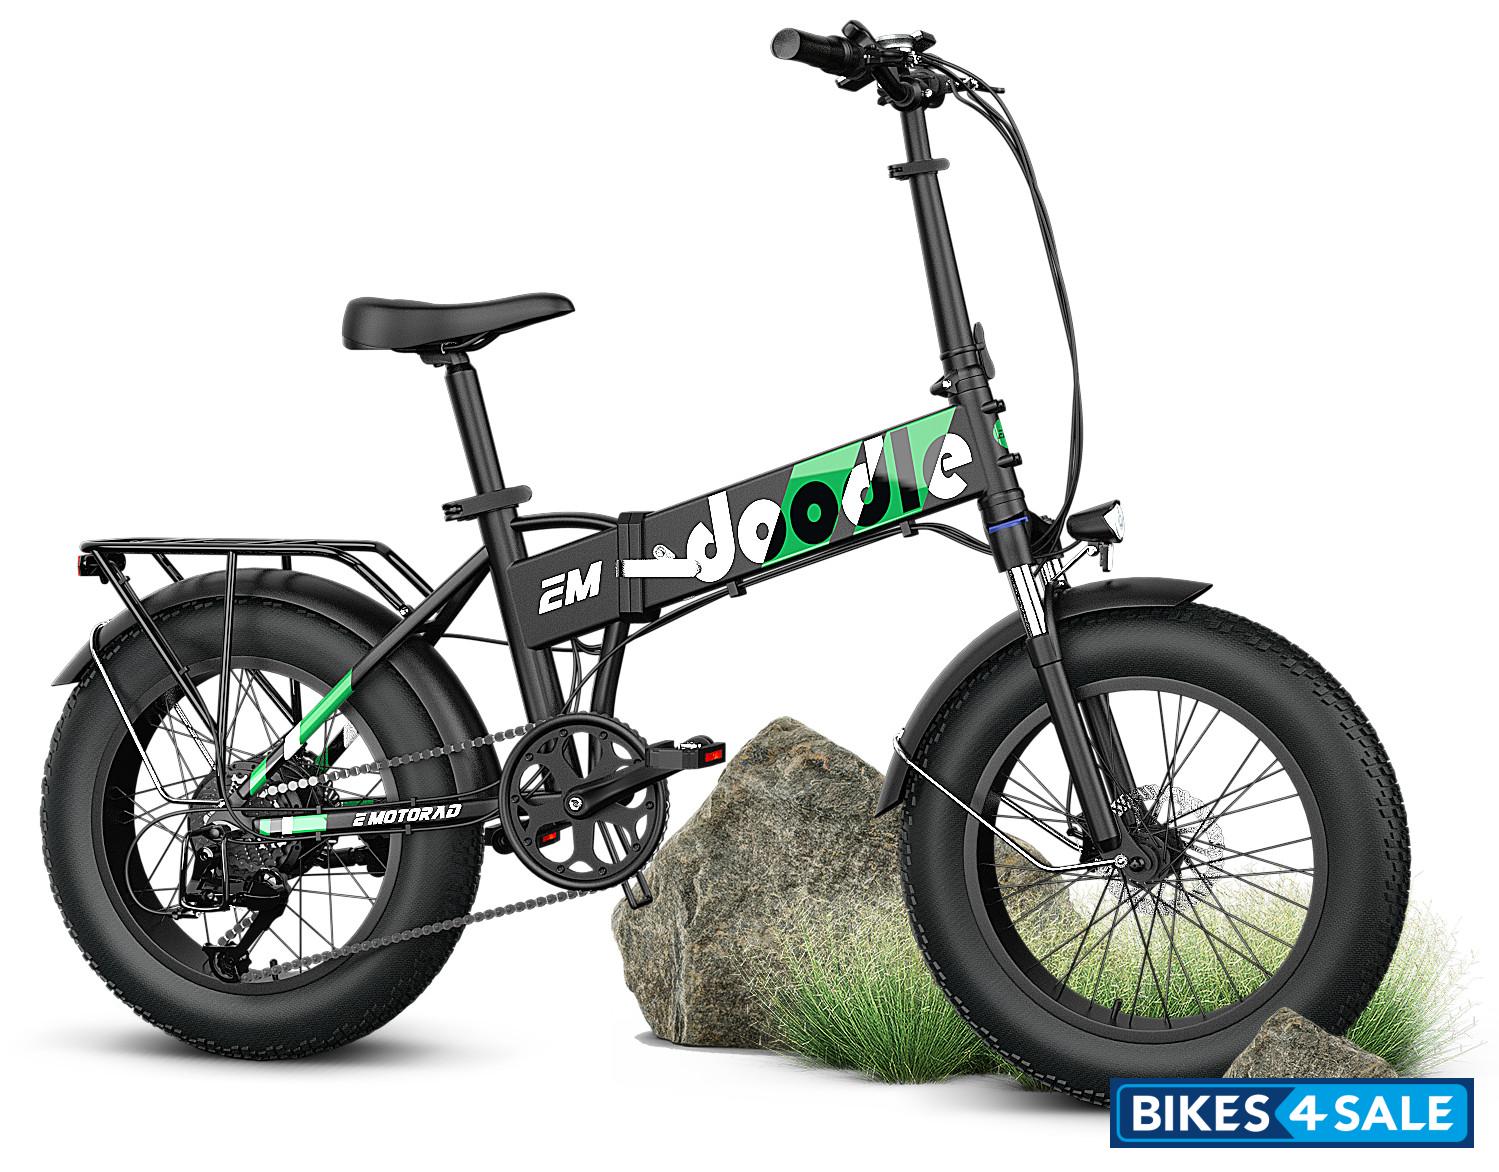 EMotorad Doodle v2 Electric Bicycle price, colours, pictures, specs and reviews - Bikes4Sale